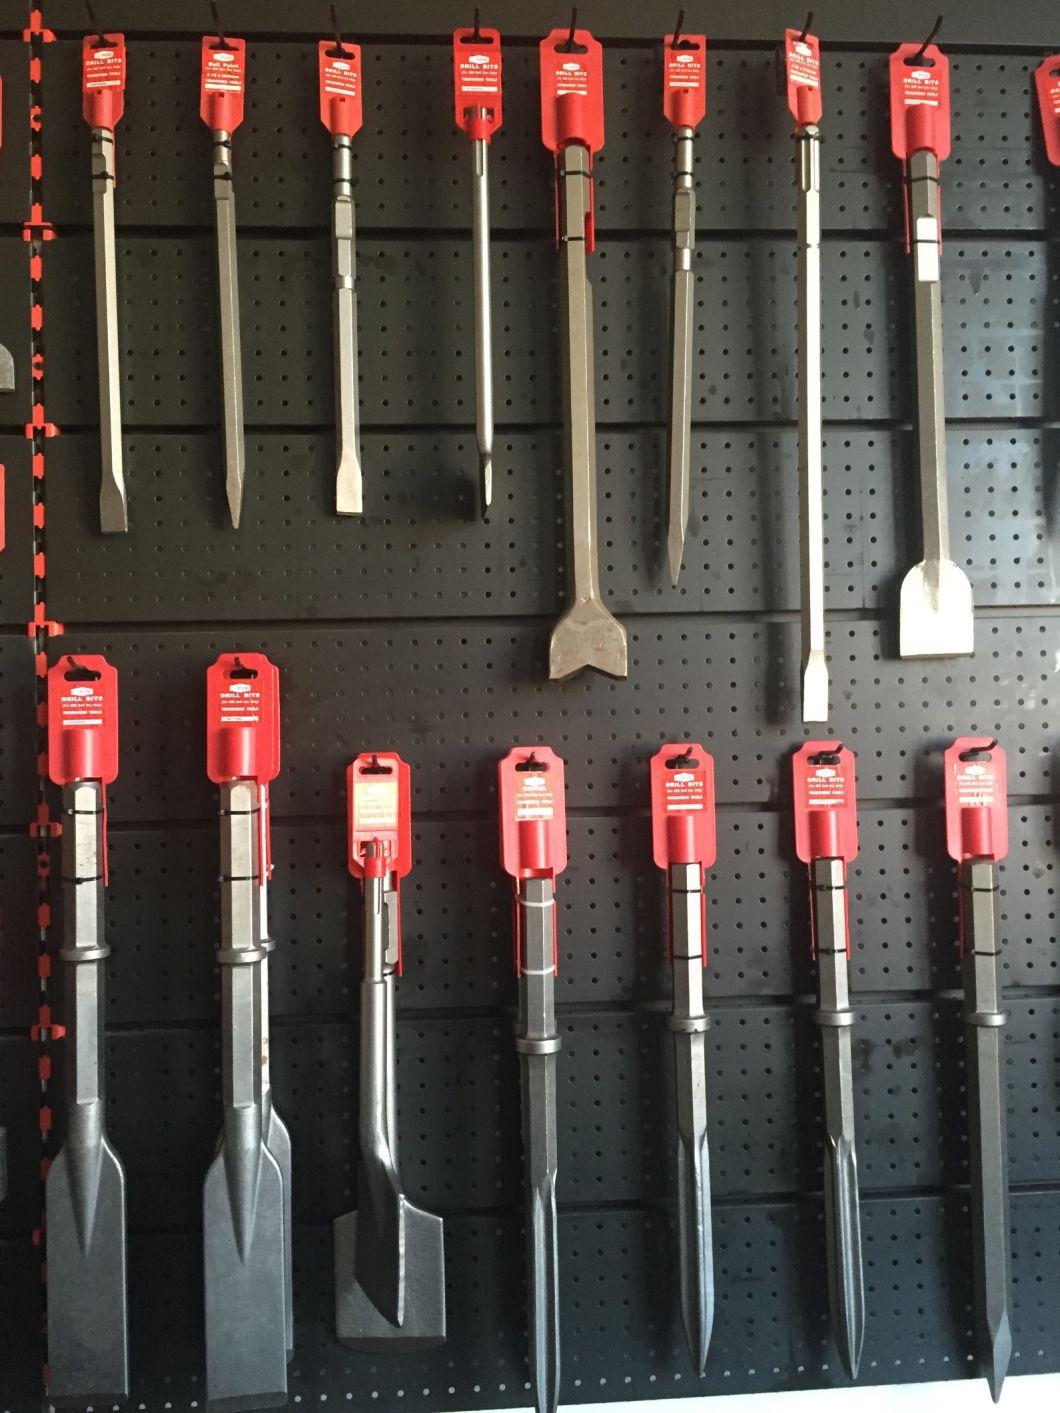 pH65 Spade Chisels for Stone or Concrete (SED-SC-pH65)